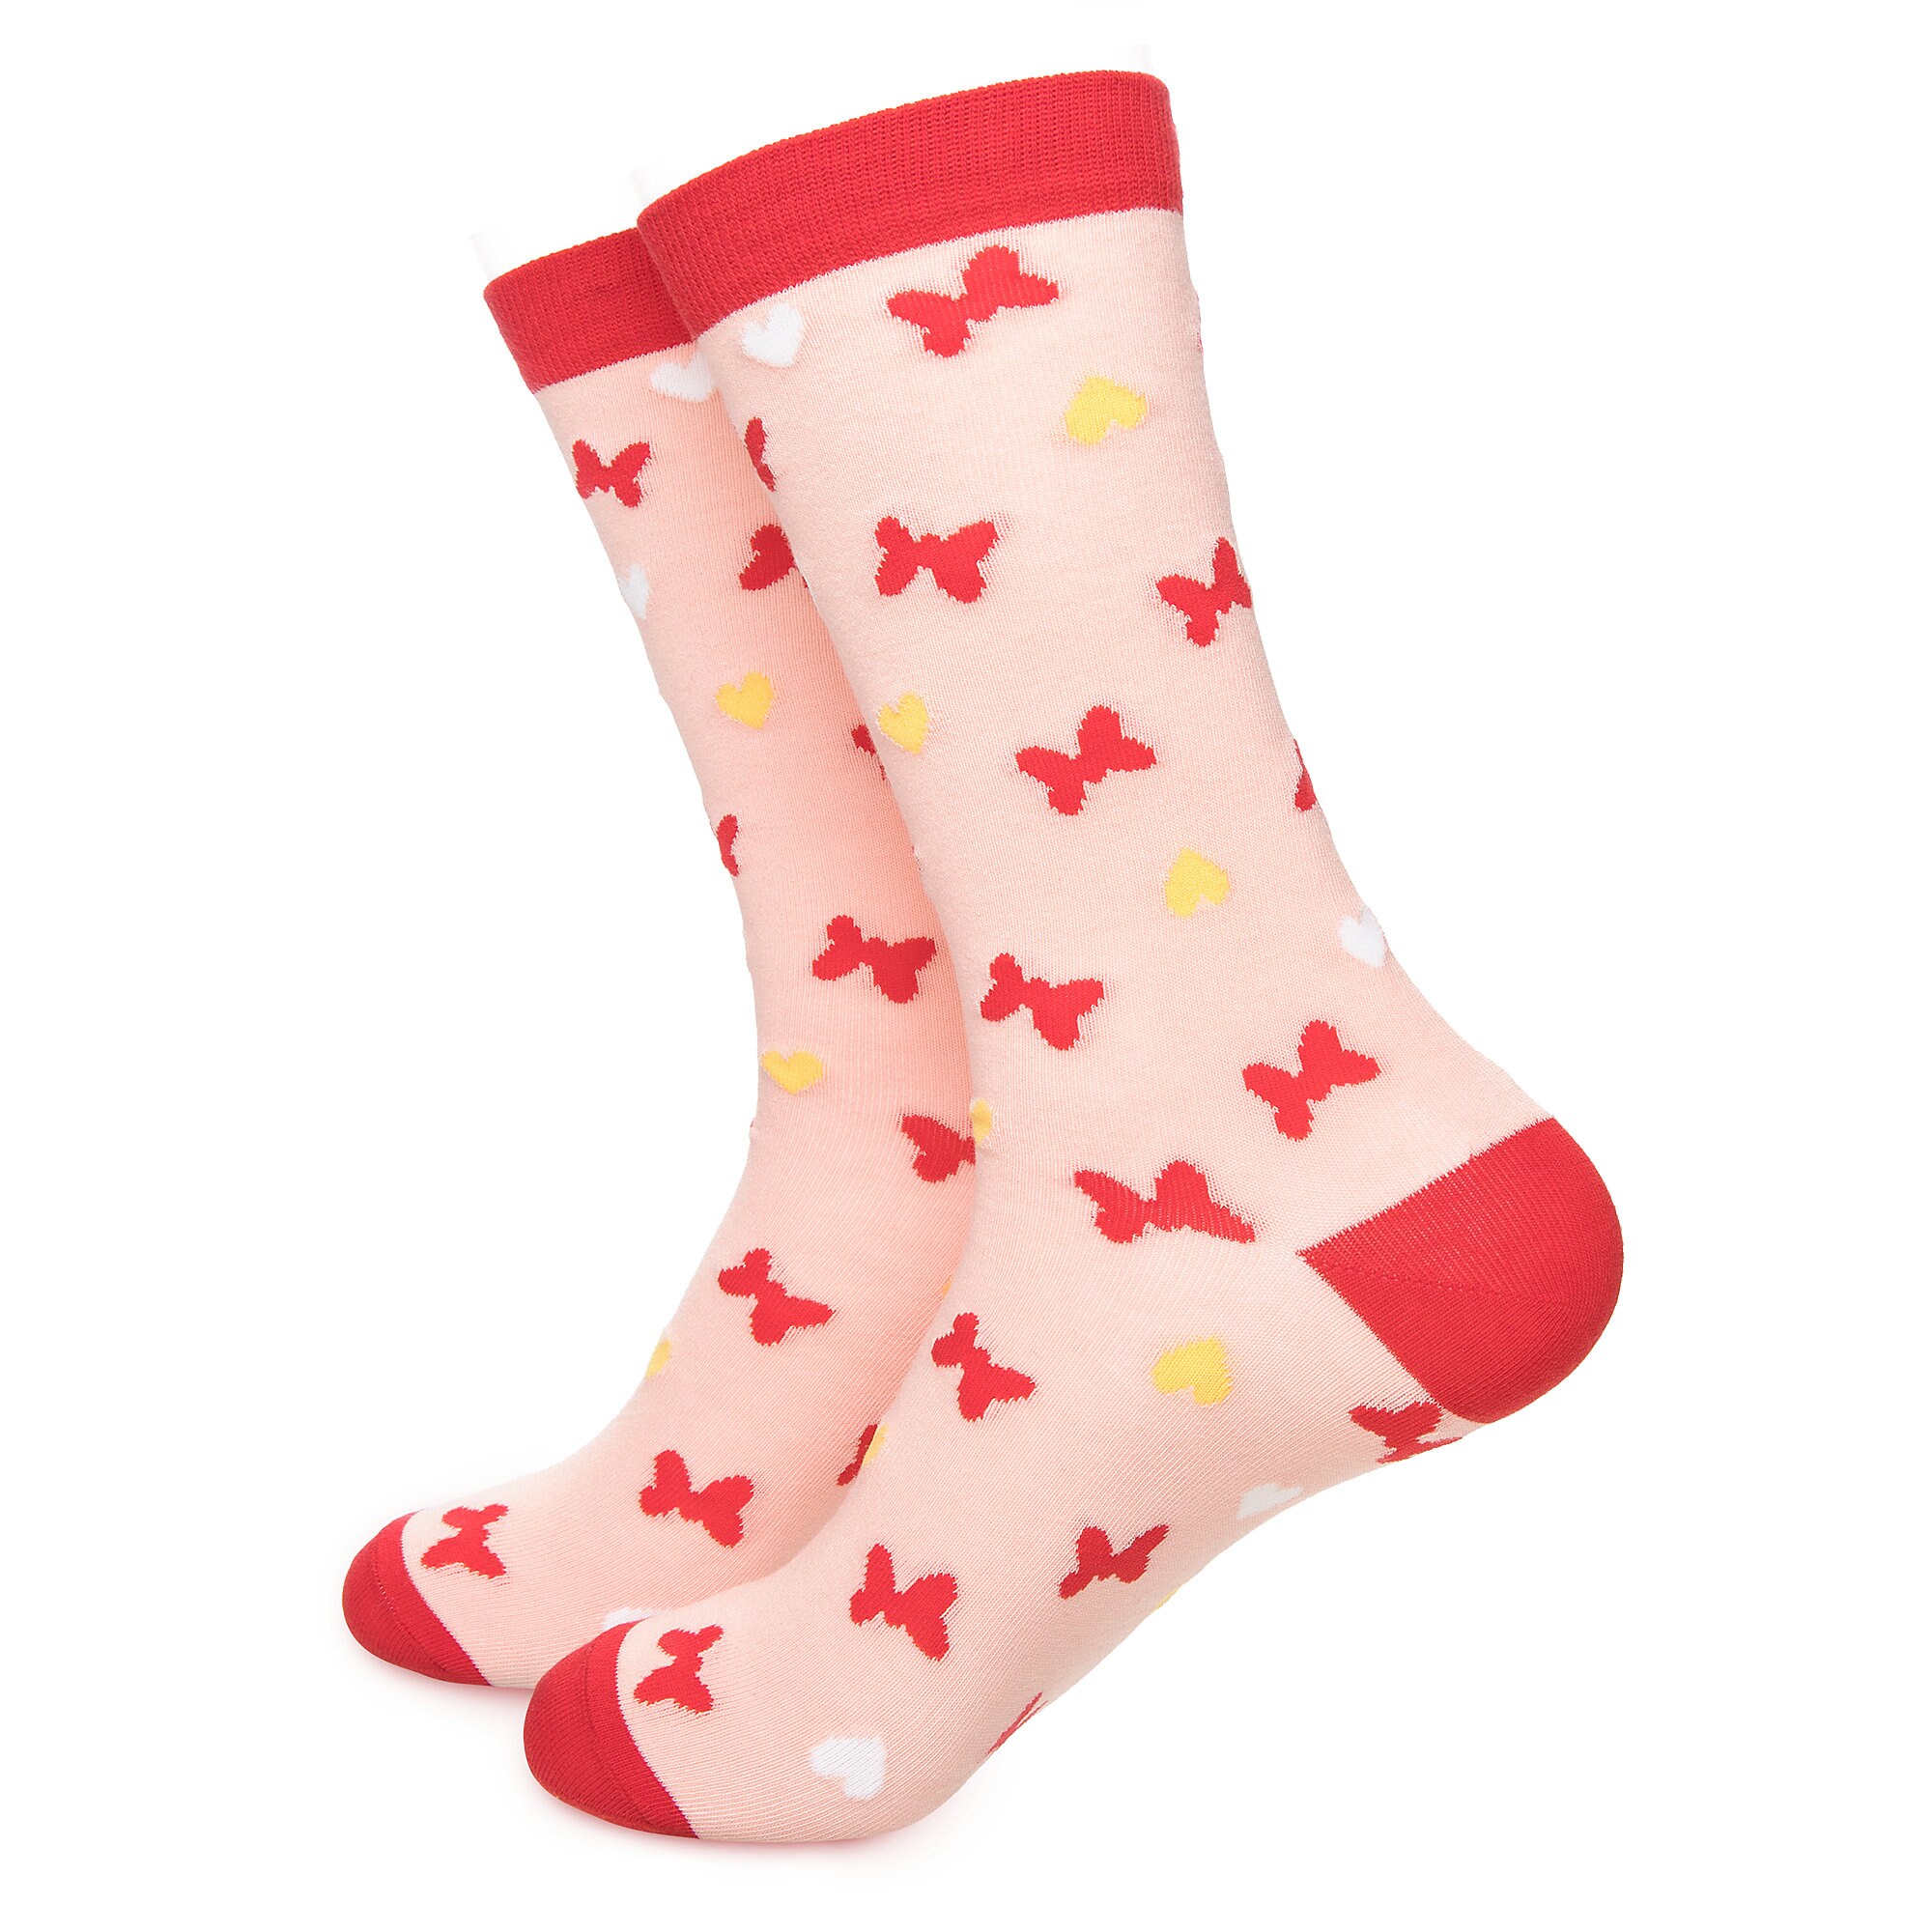 Minnie Mouse Cupcake Socks for Adults